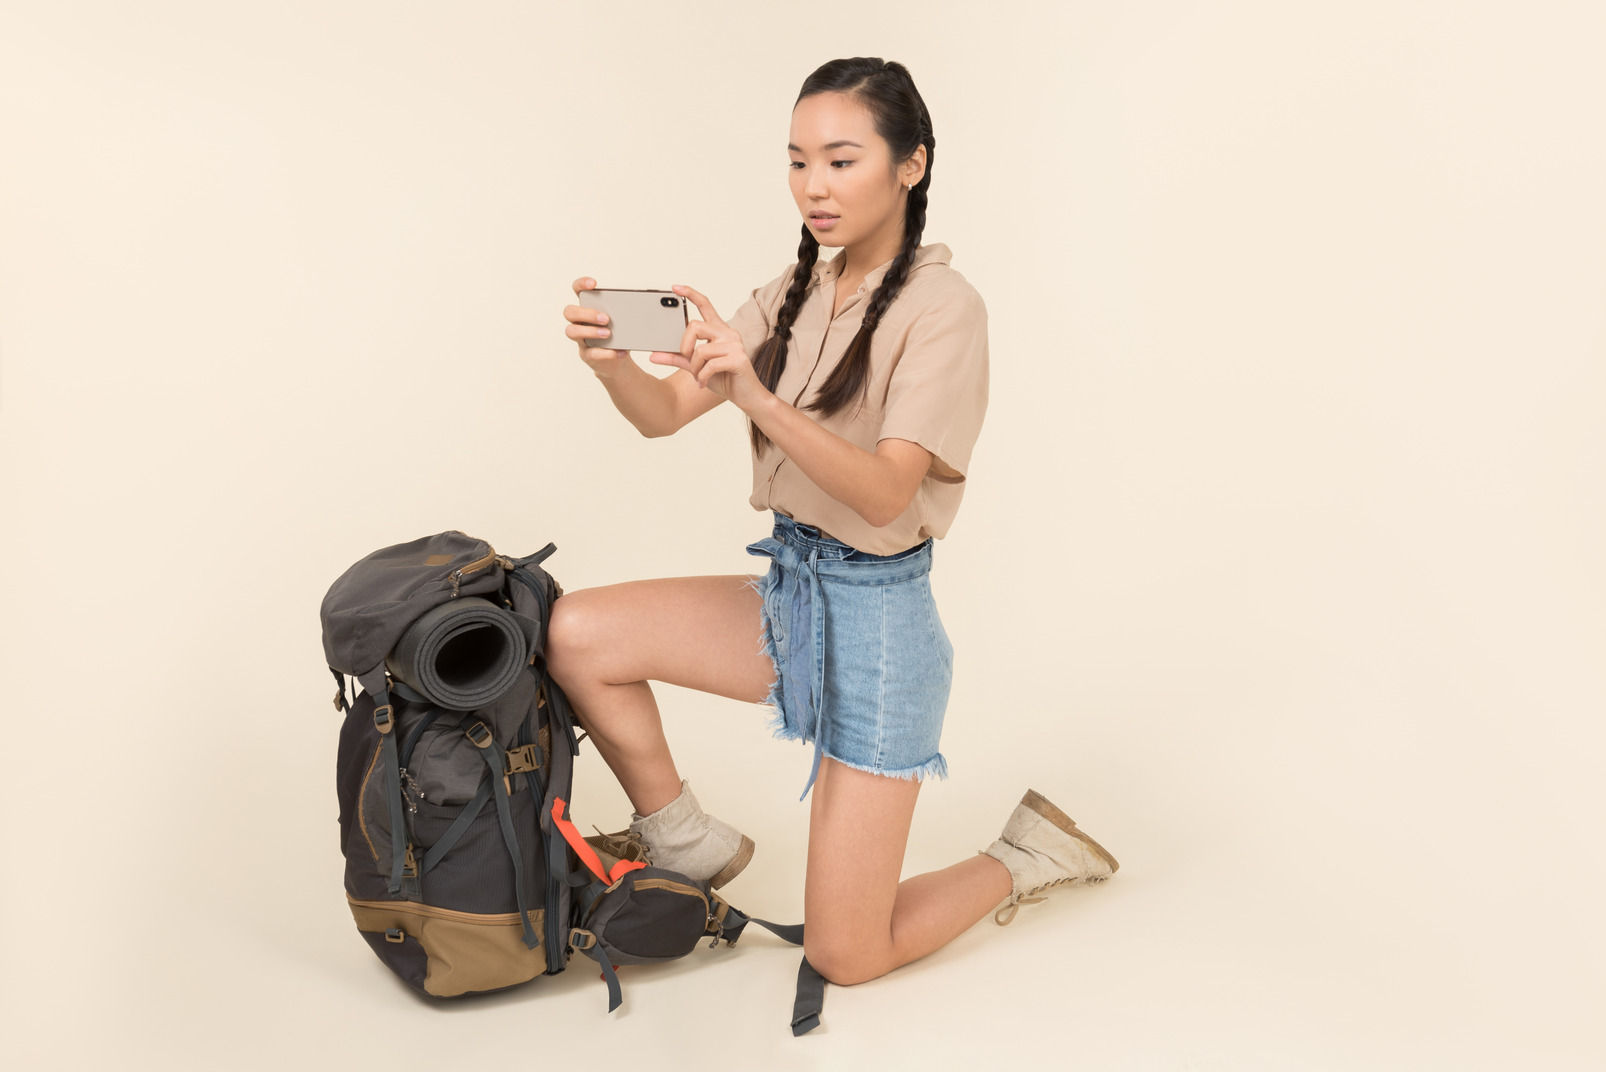 Outraged young asian woman standing near backpack and taking picture with smartphone